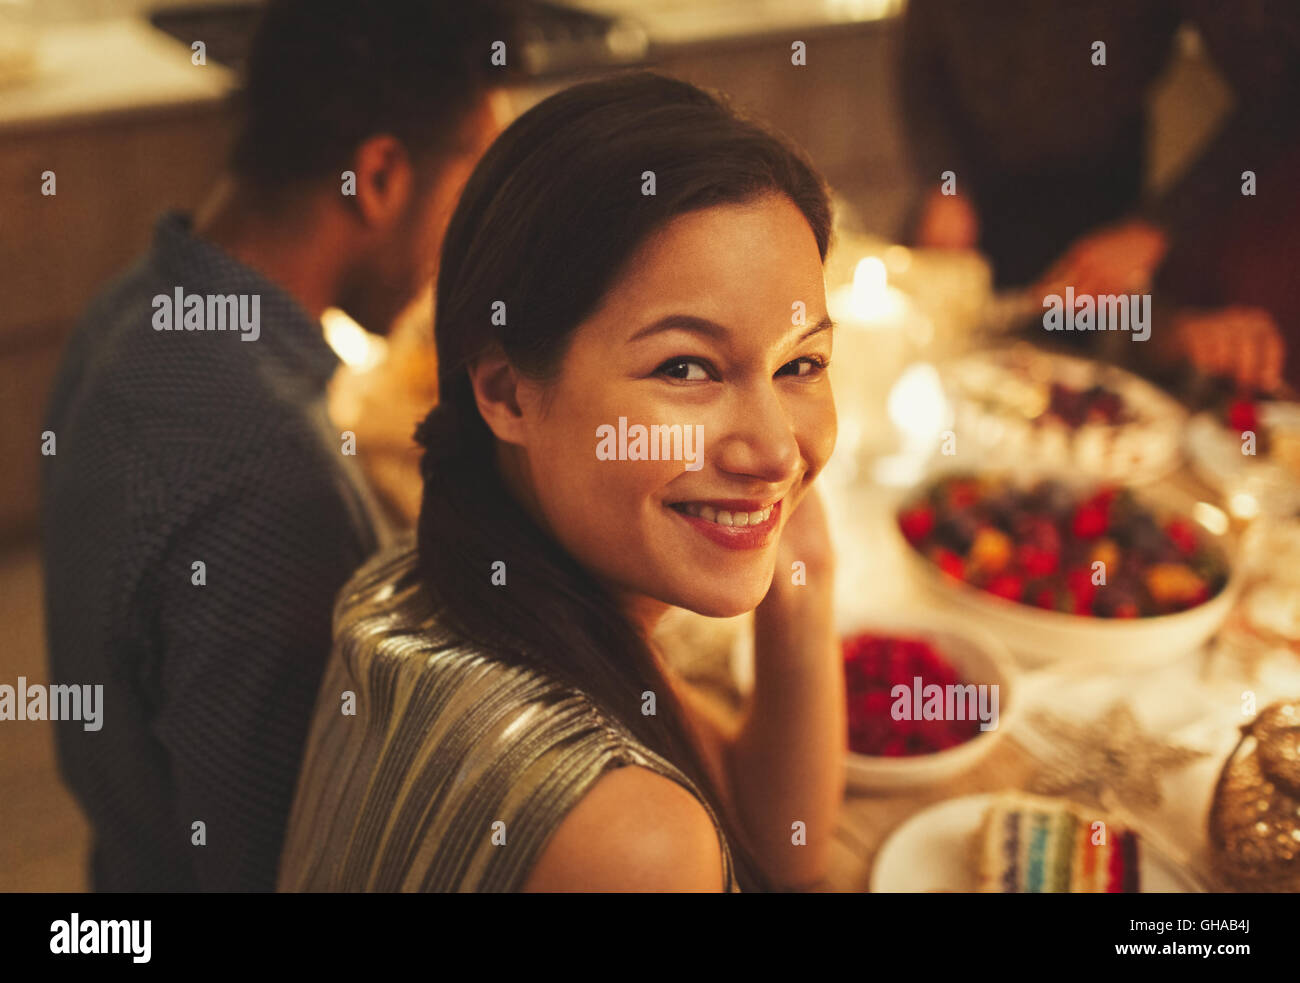 Portrait of smiling woman at Candlelight Dinner Party Banque D'Images